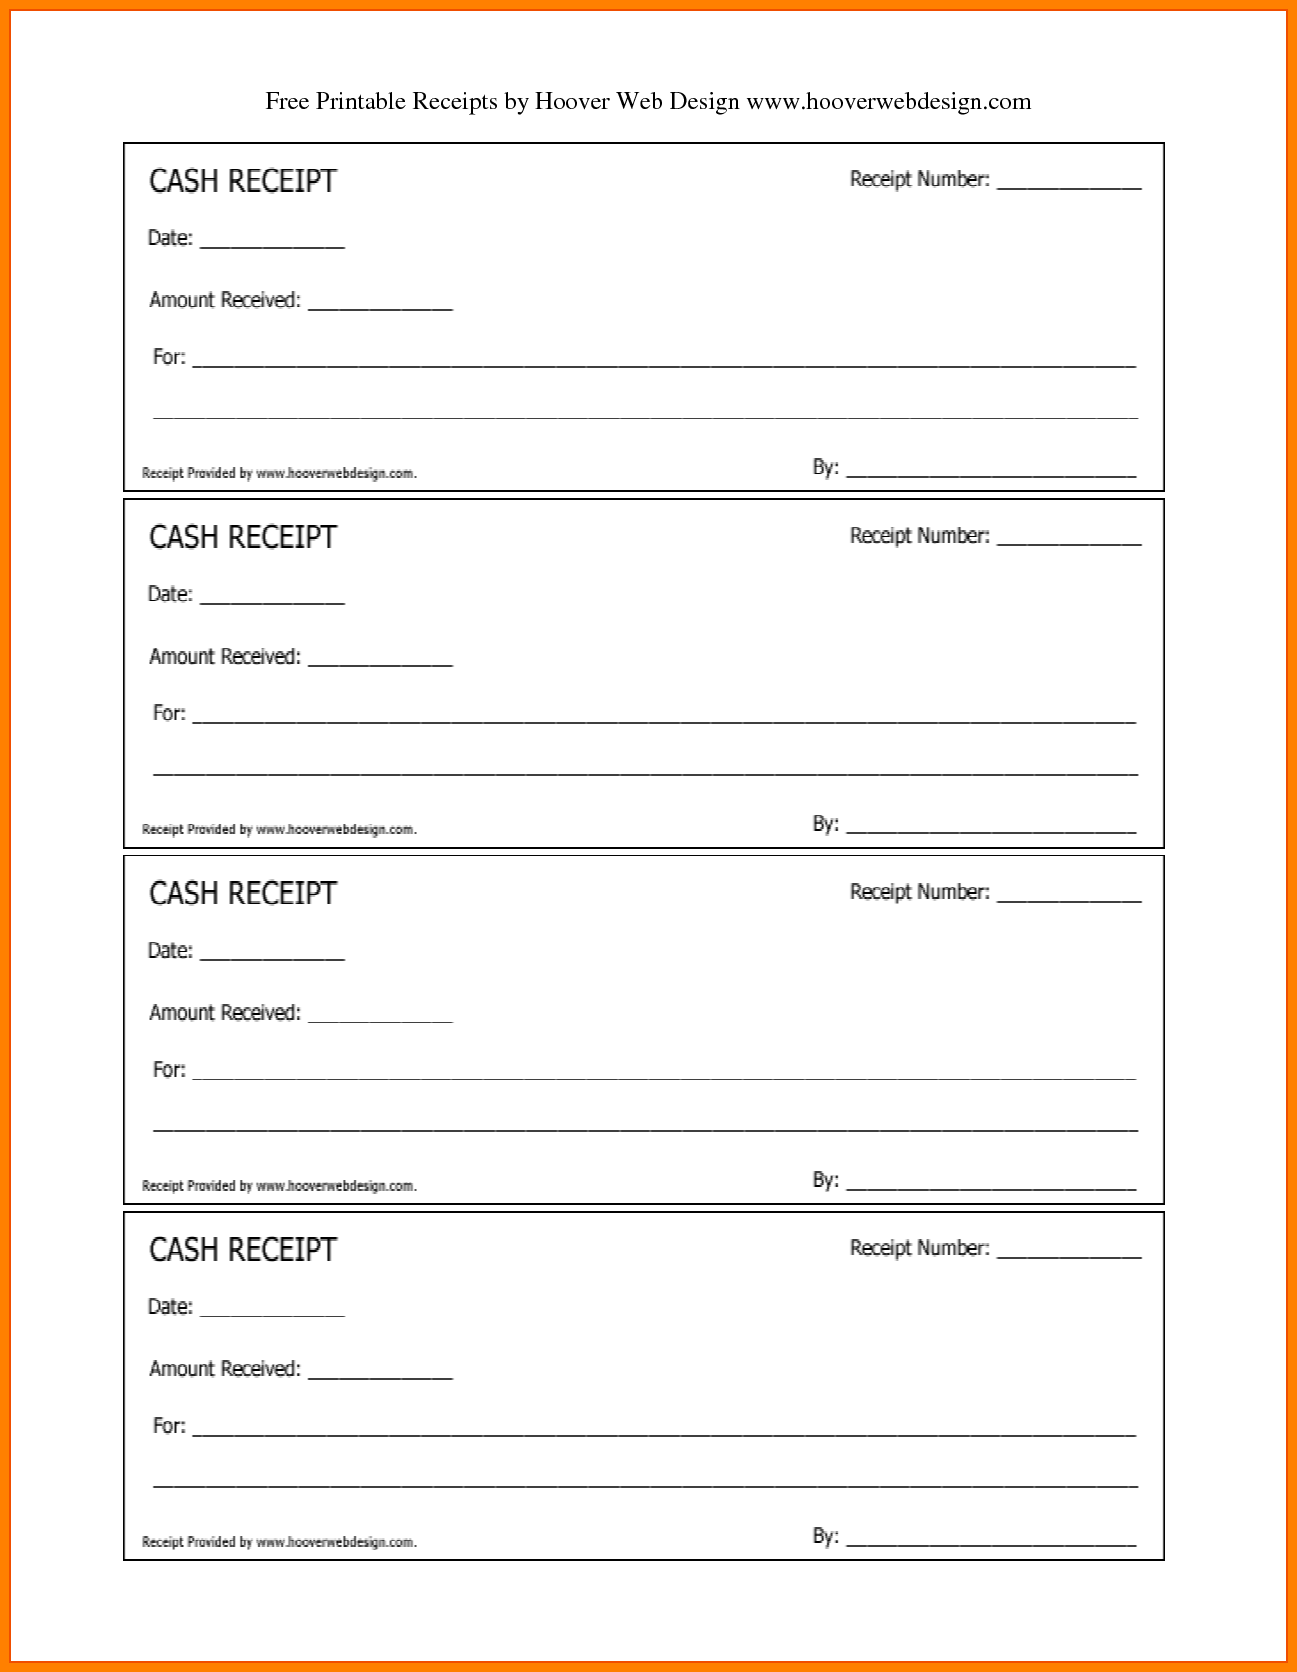 free-printable-payment-information-forms-printable-forms-free-online